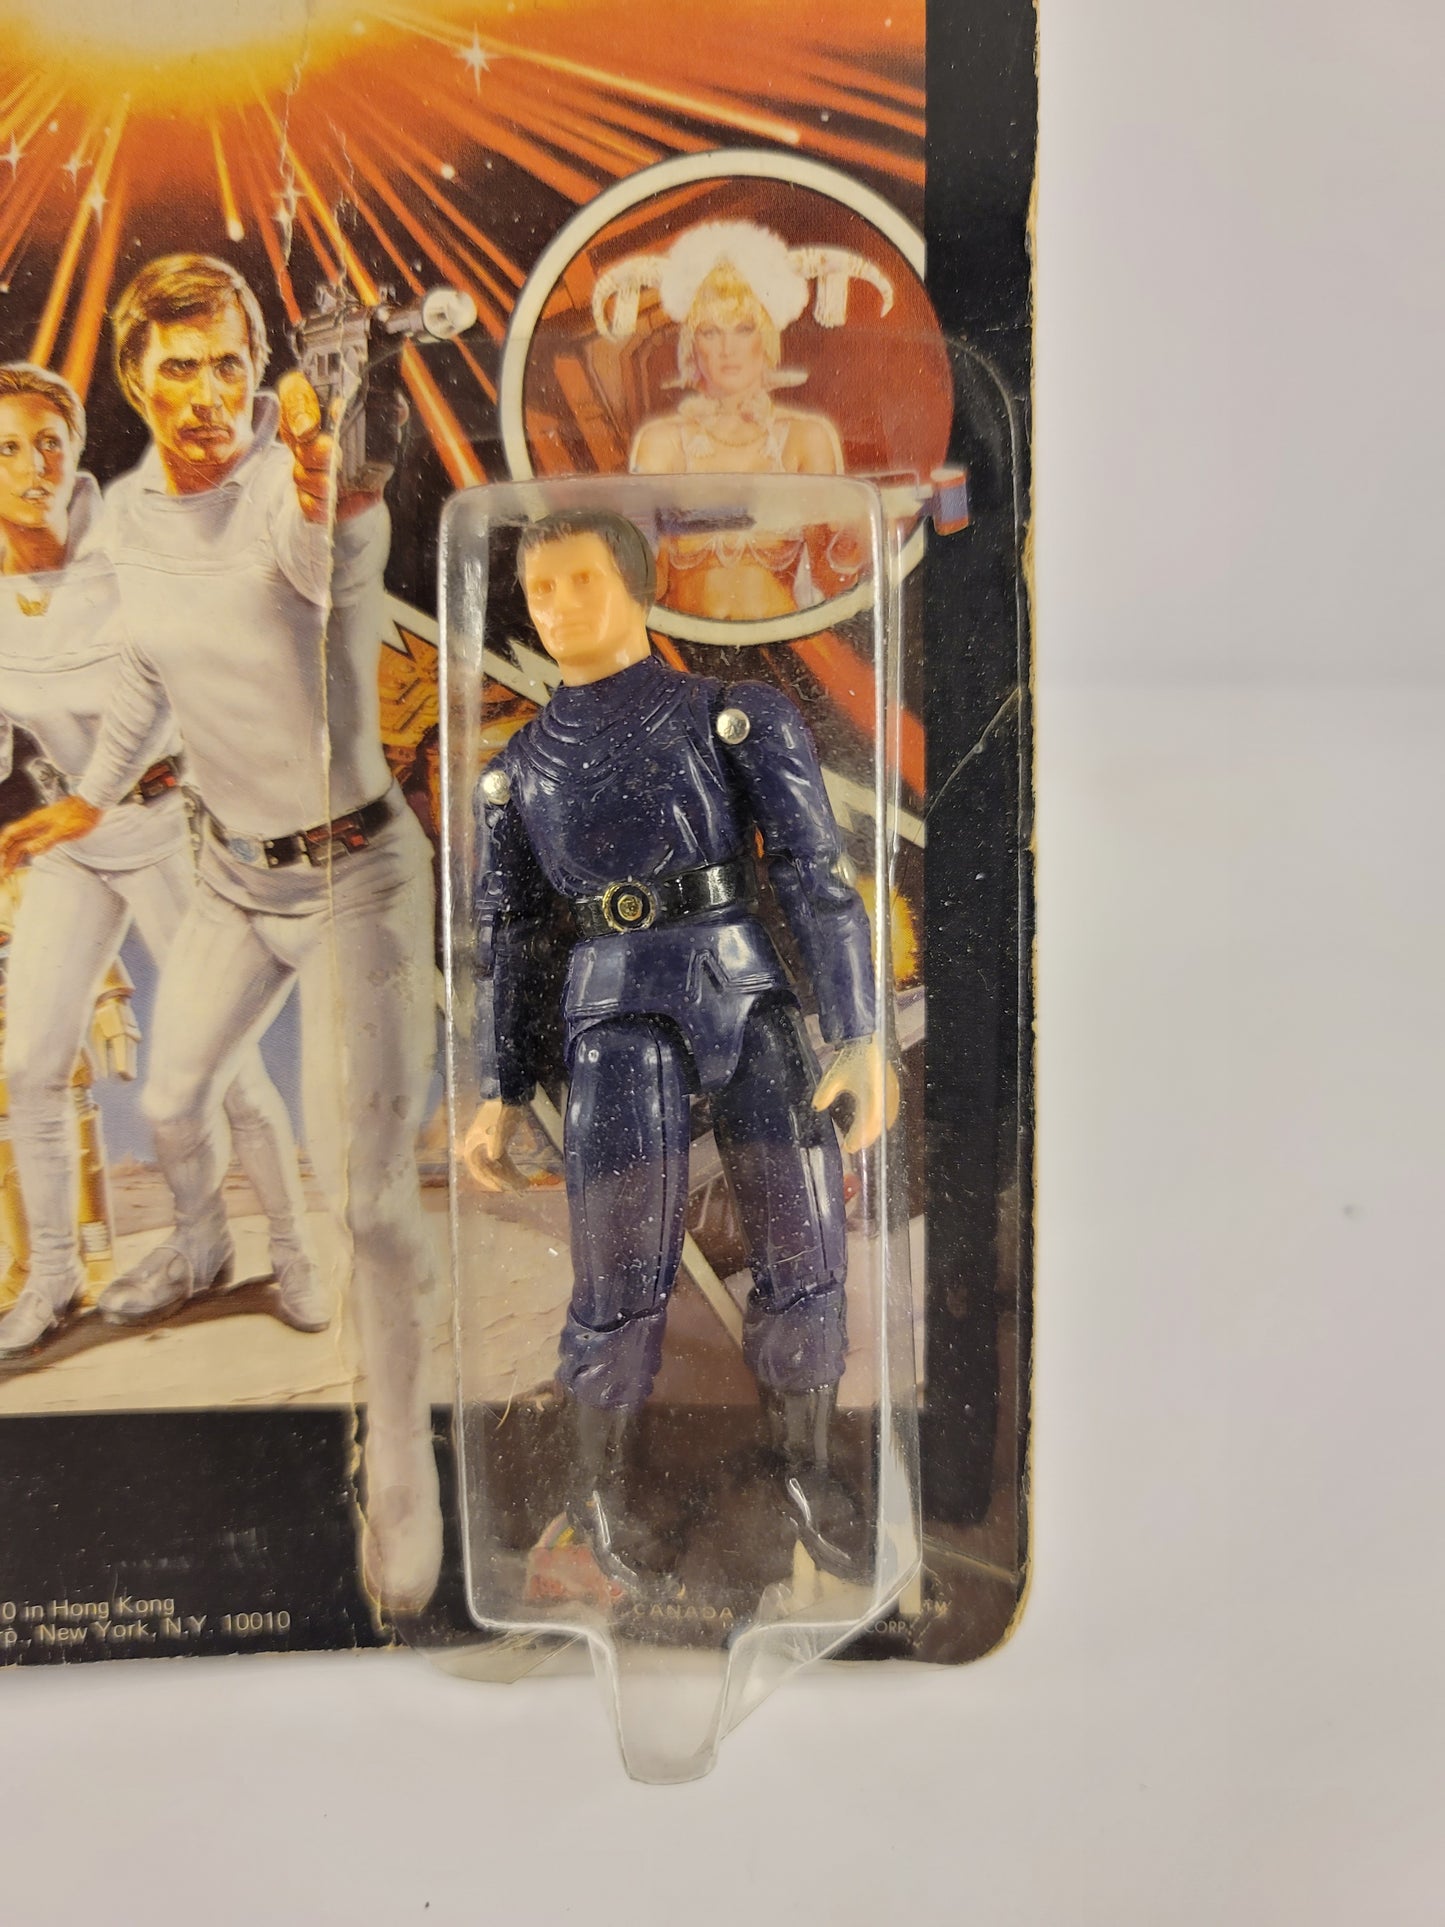 Killer Kane - Buck Rogers in the 25th Century - Action Figure - 1979